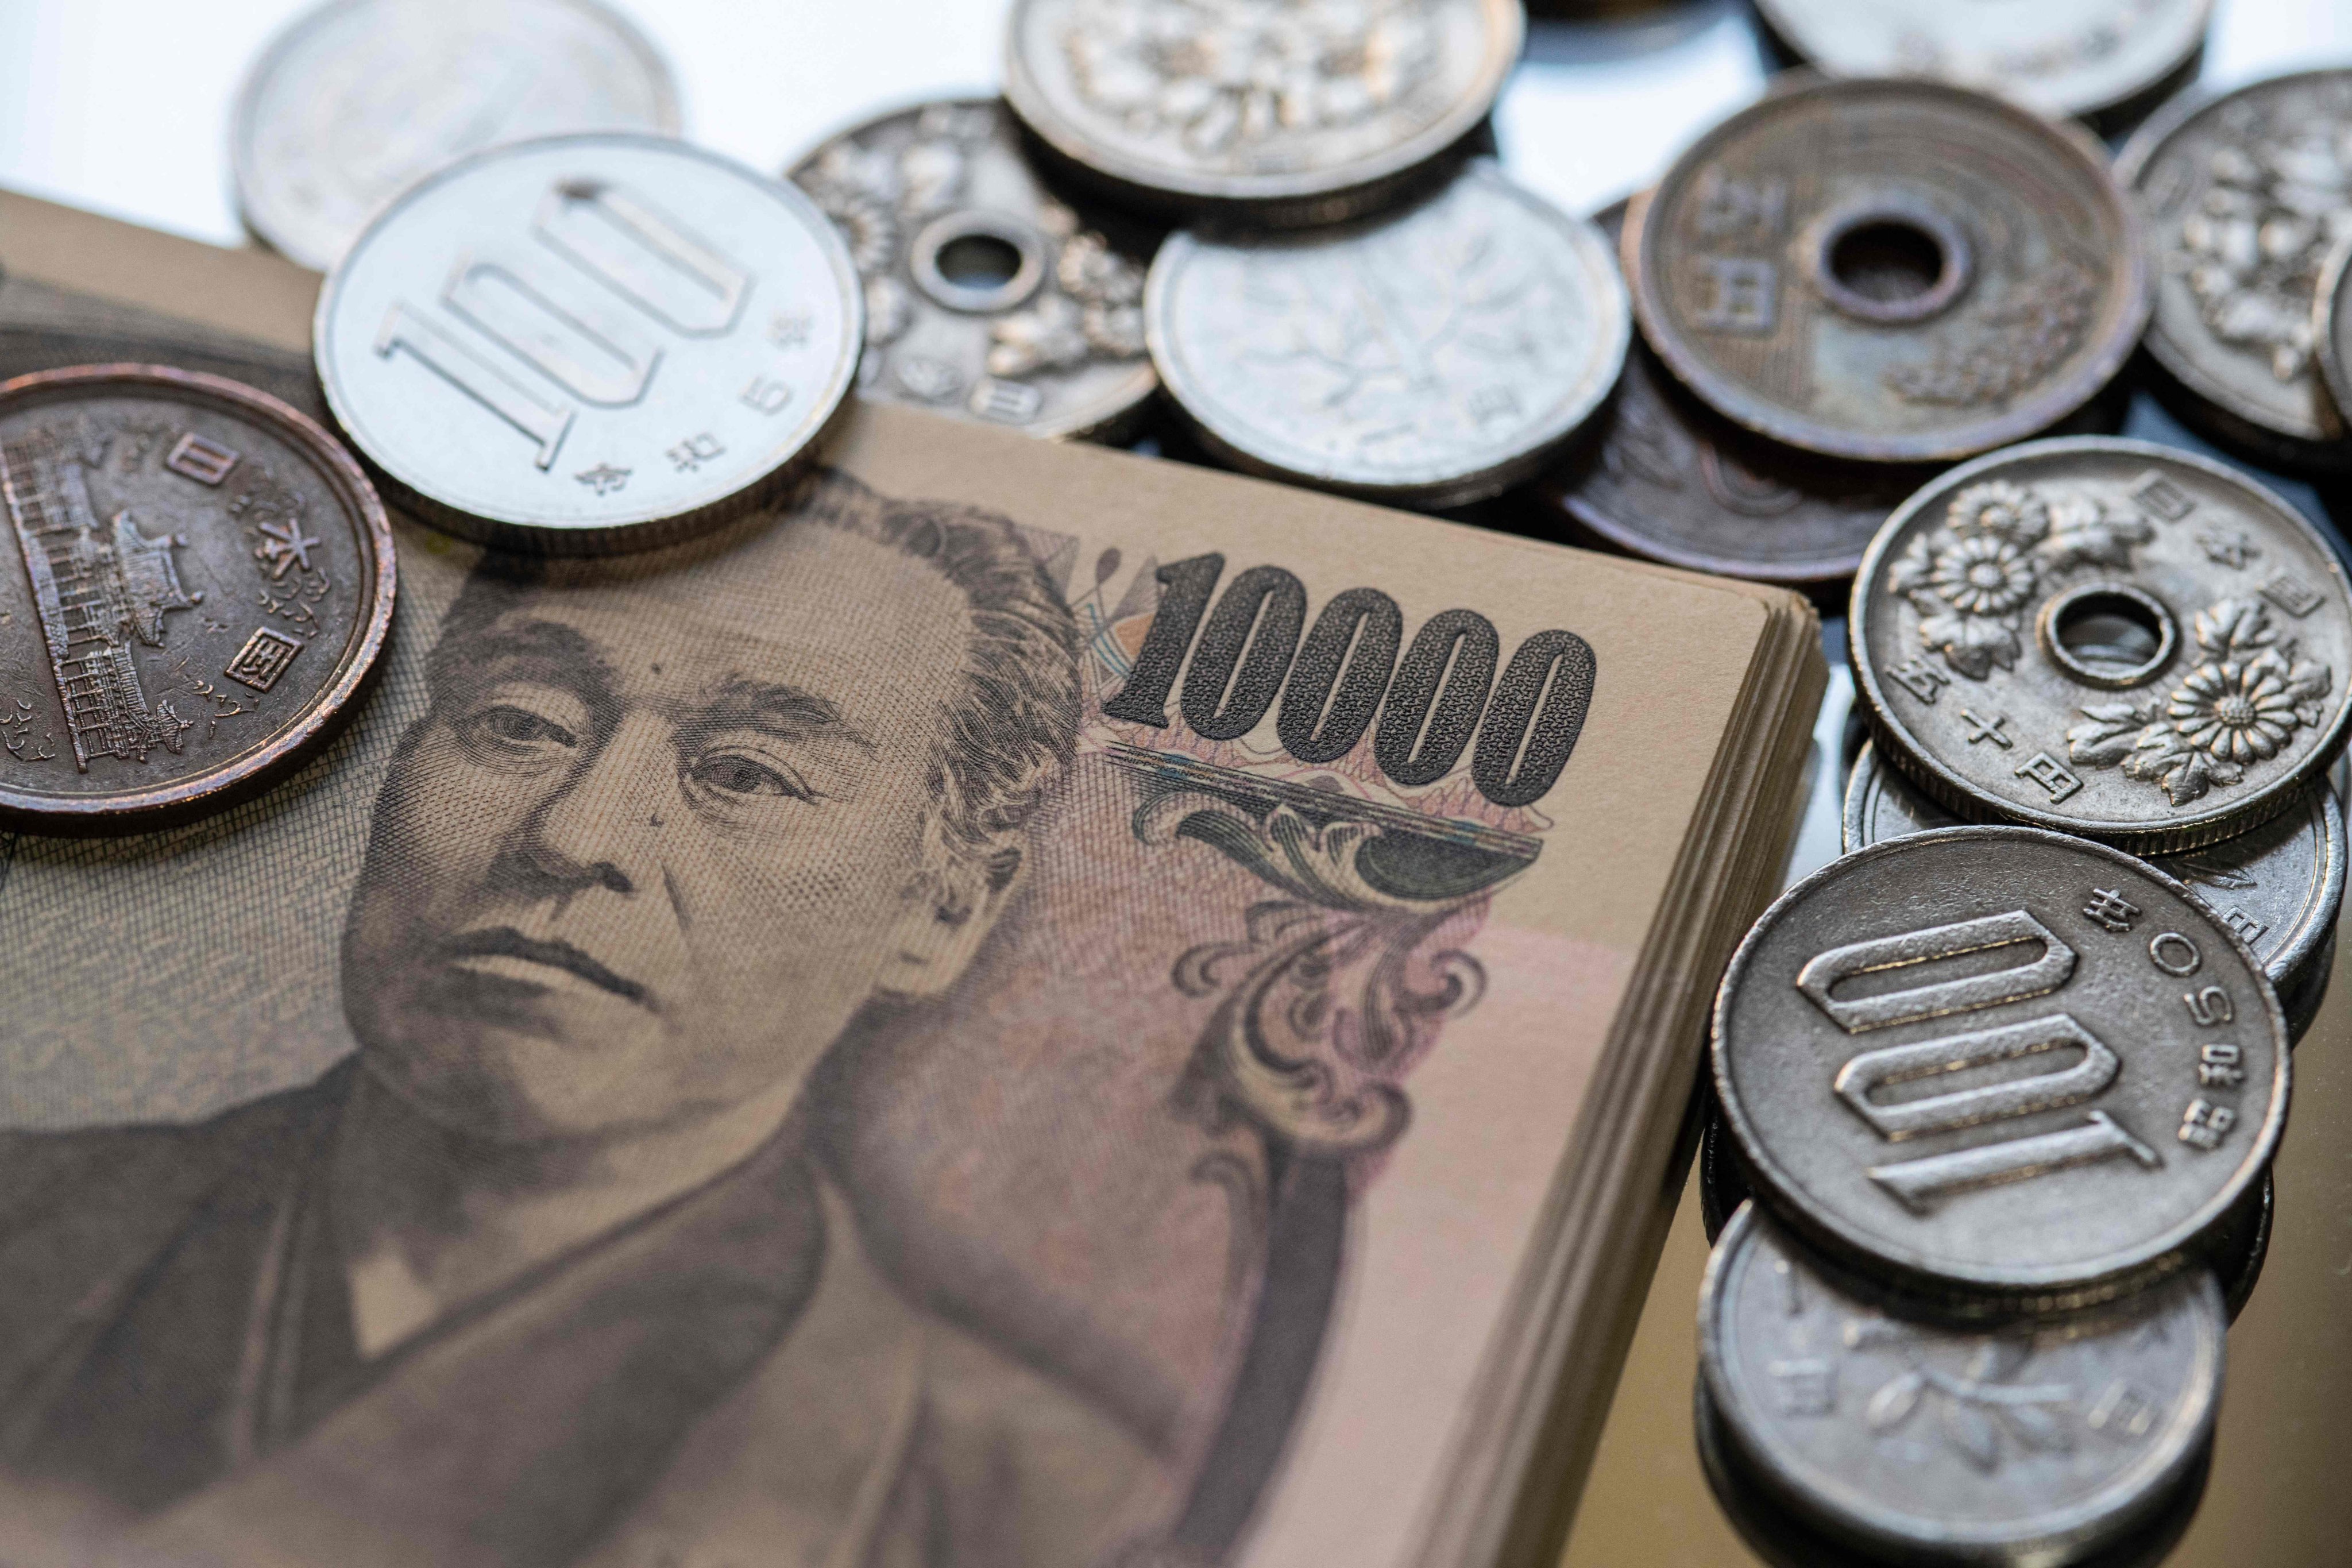 Japan could become a big attraction for Hongkongers and hit the city economy after the yen hit a 34-year low against the US dollar. Photo: AFP